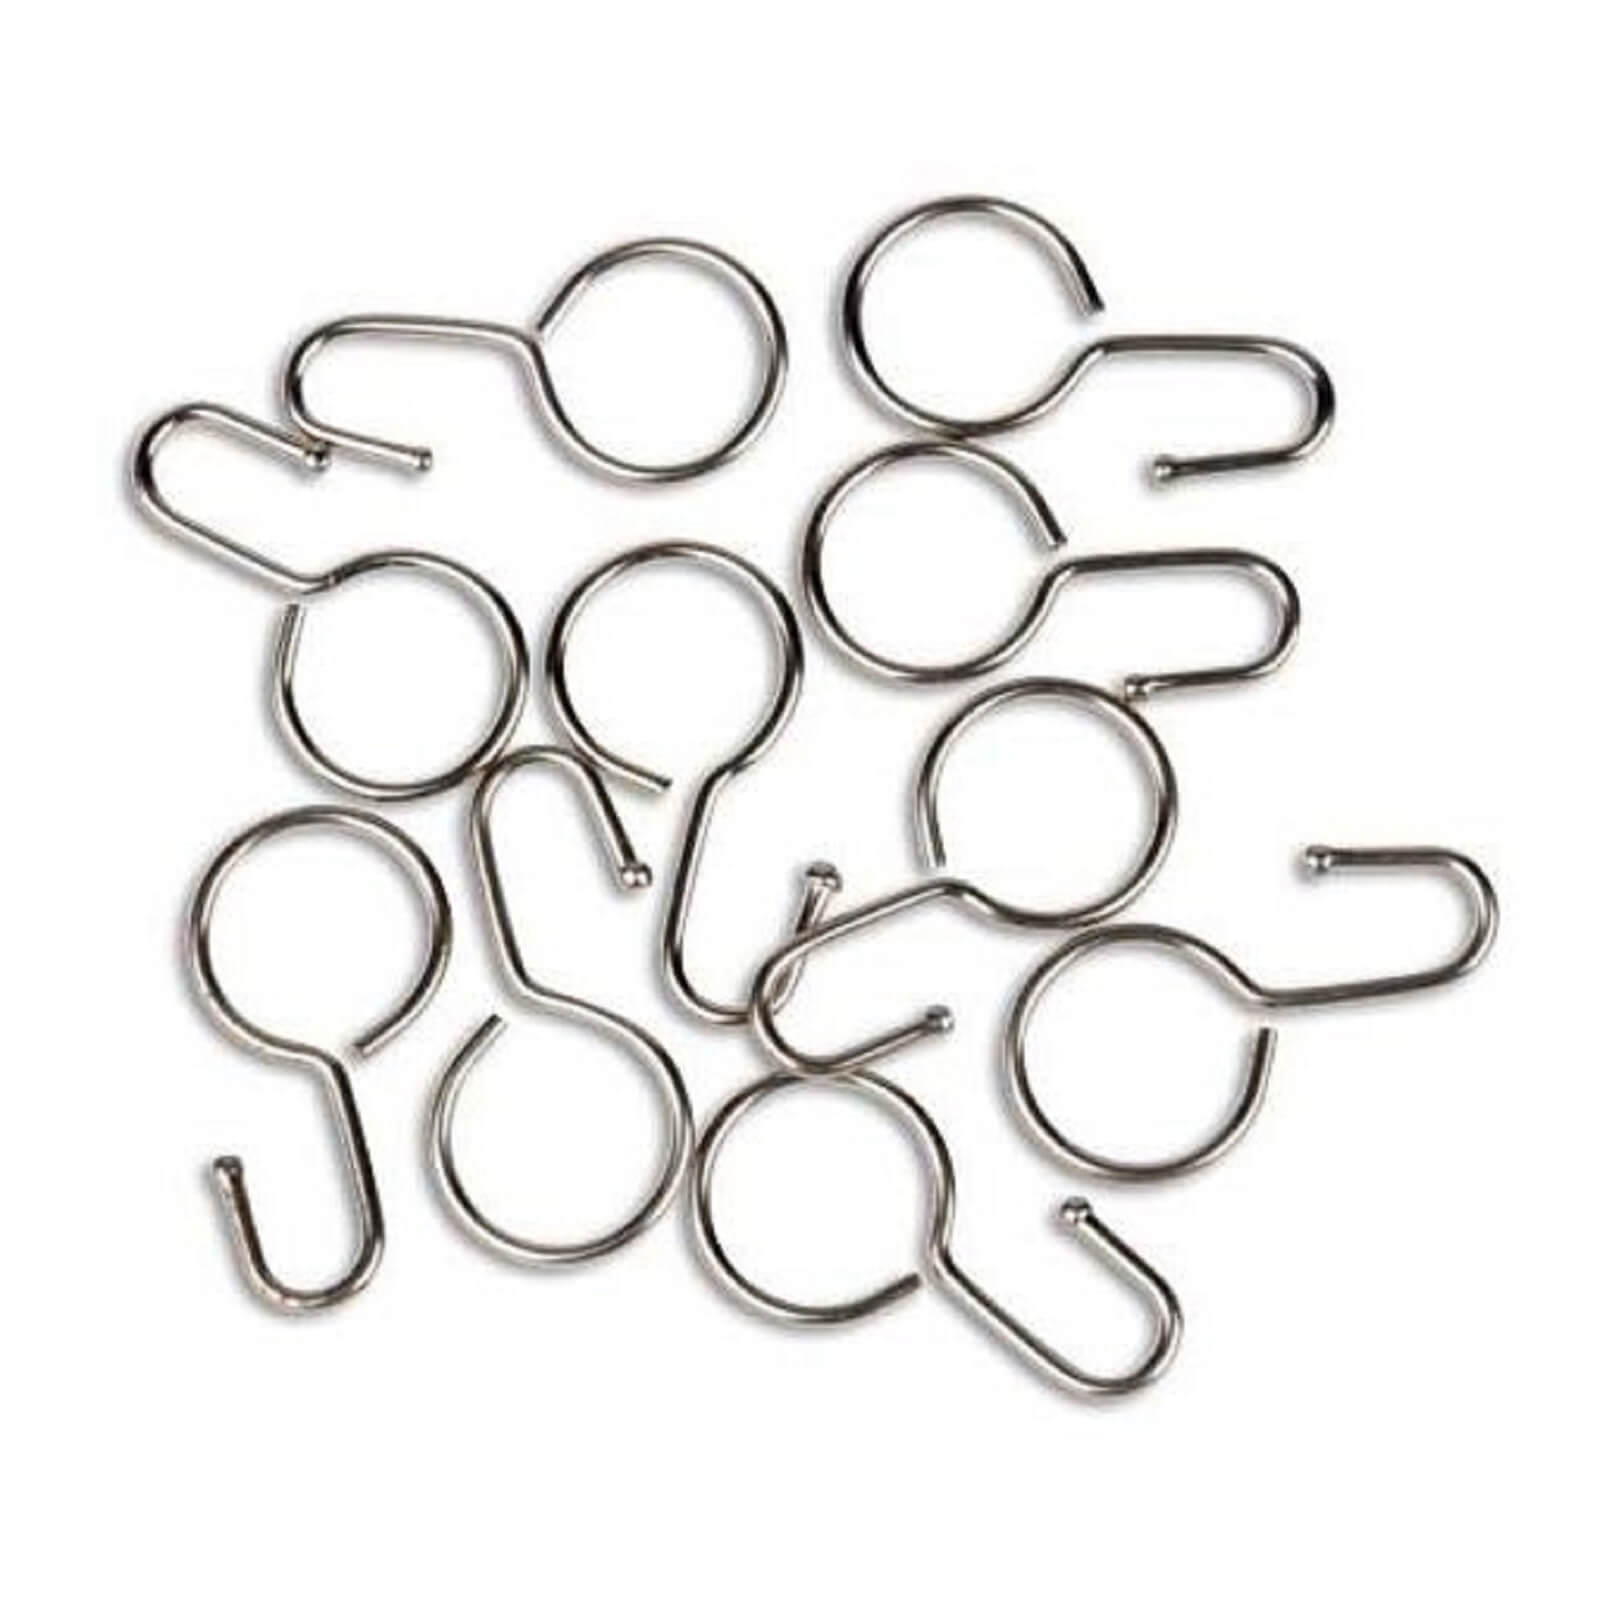 Tension Wire Curtain J Rings 10 pack